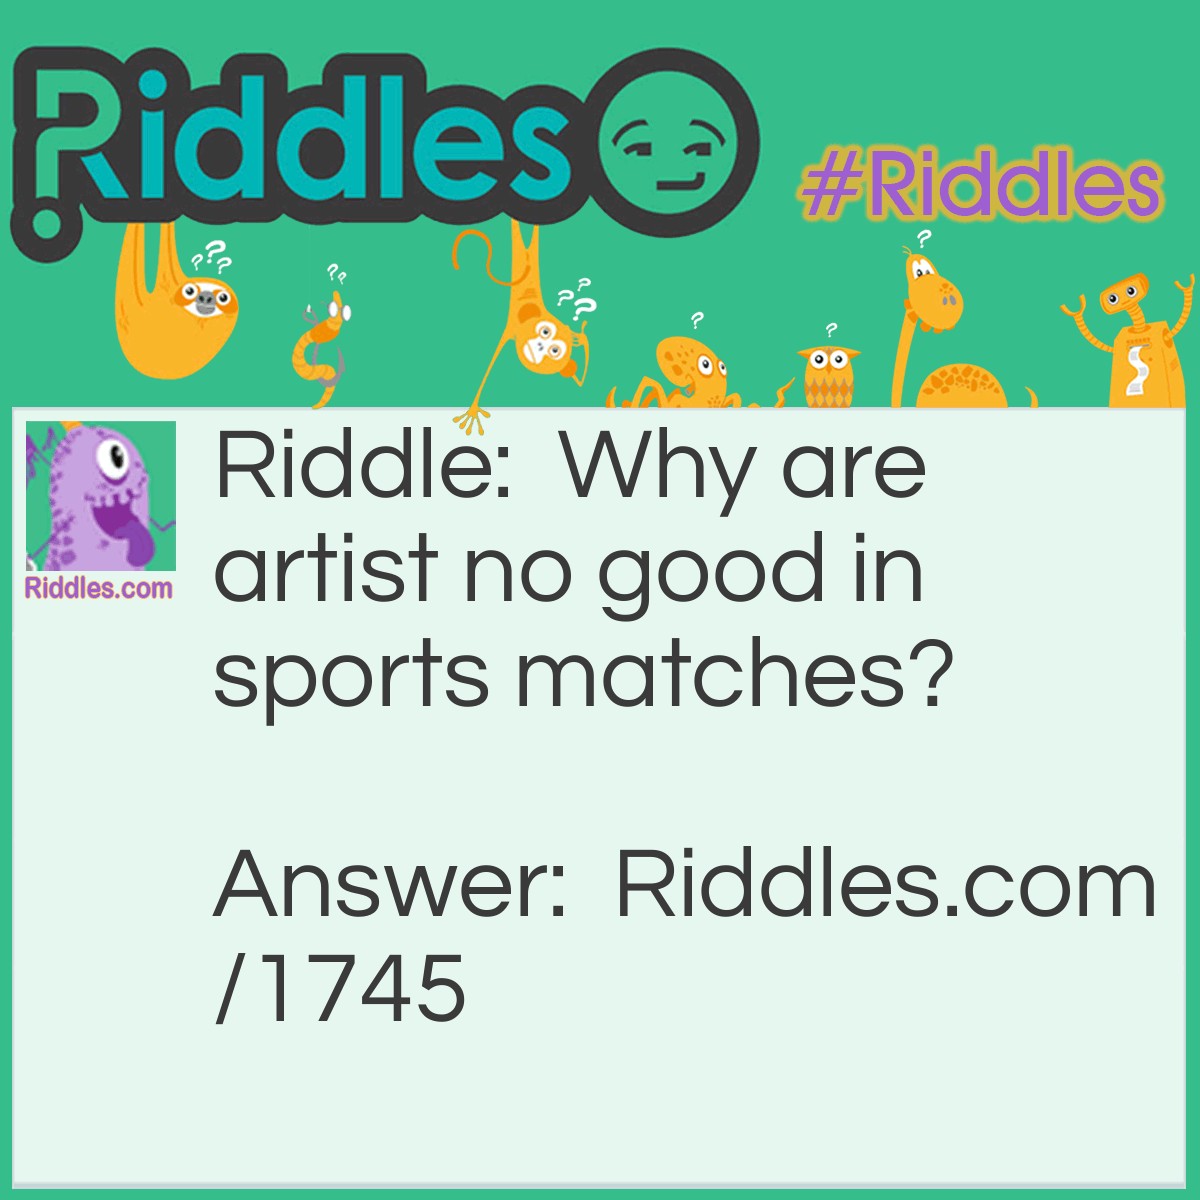 Riddle: Why are artist no good in sports matches? Answer: Because they keep drawing.